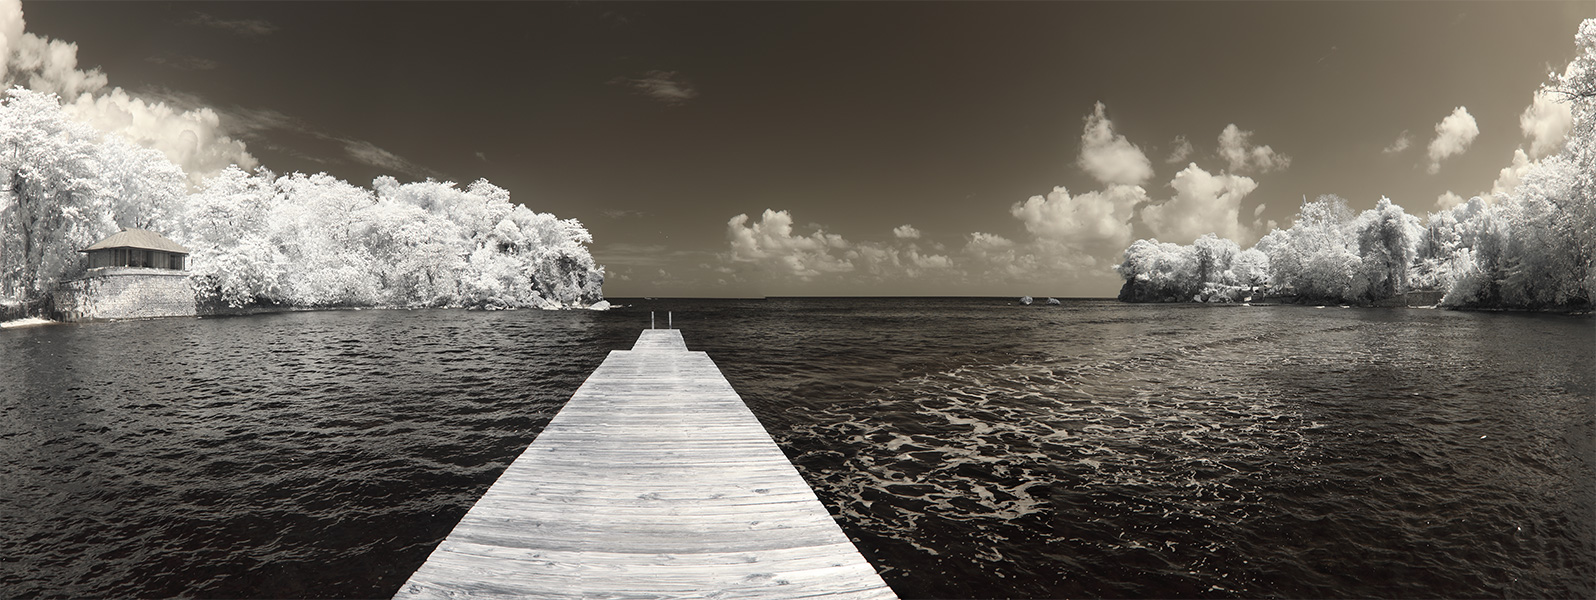 Extreme Infrared Panorama of Carribean Bay with Dock Reaching Out.